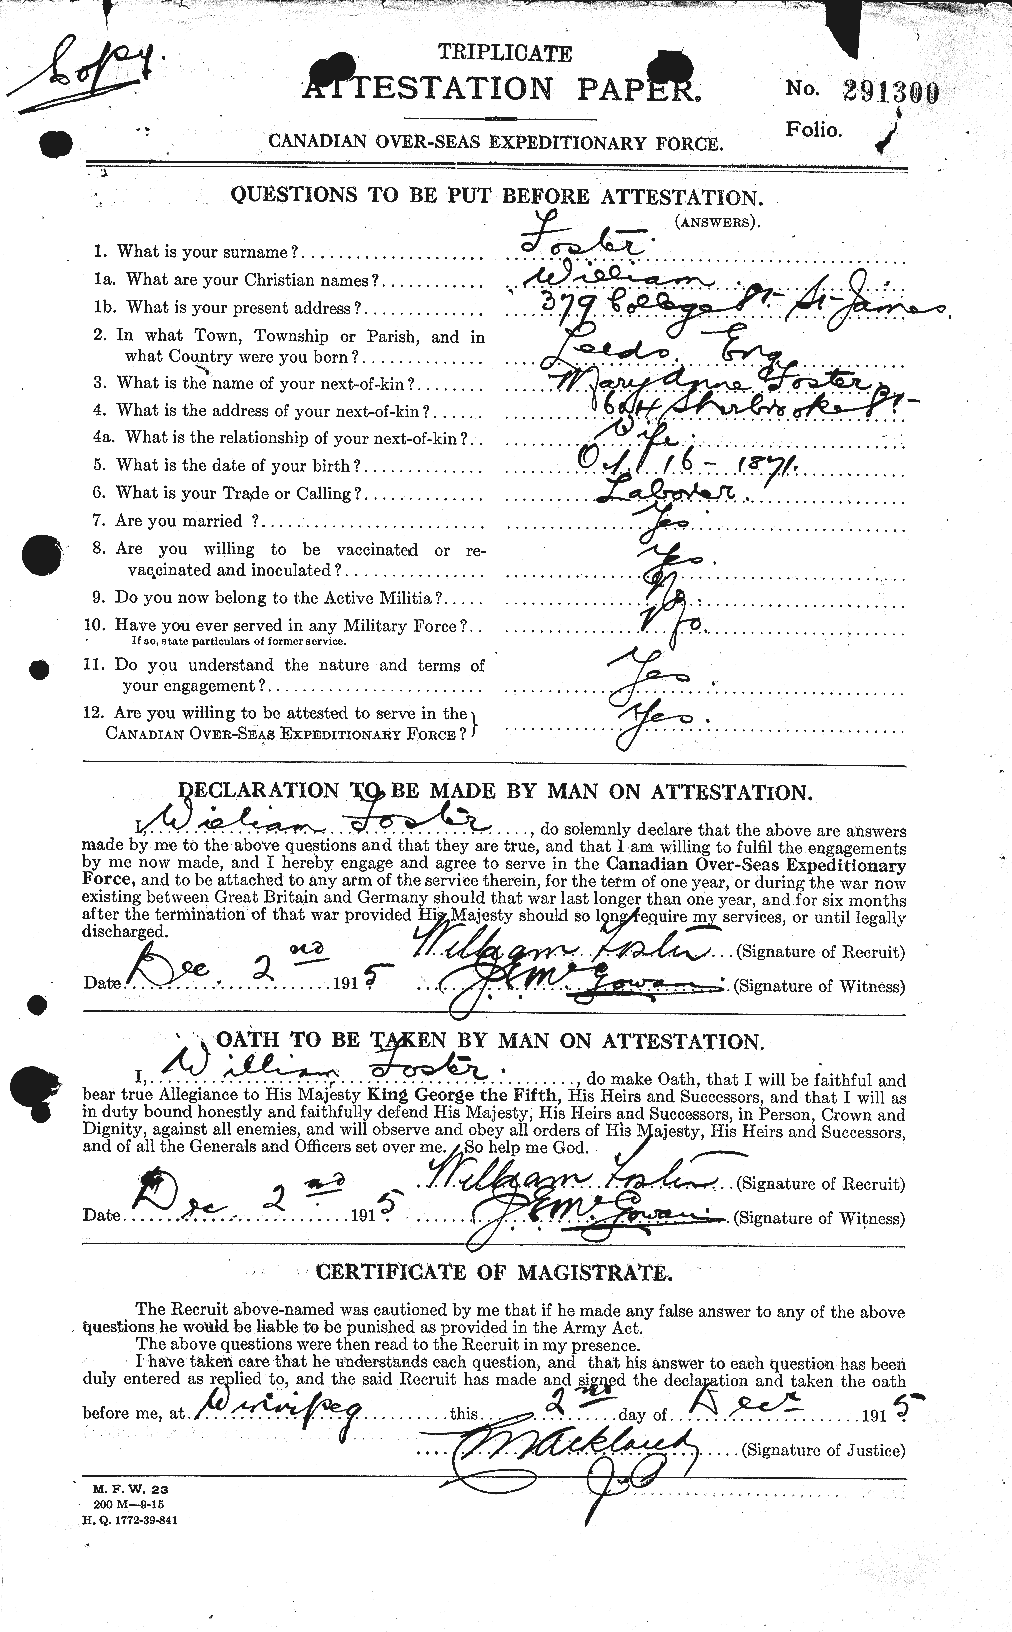 Personnel Records of the First World War - CEF 328709a